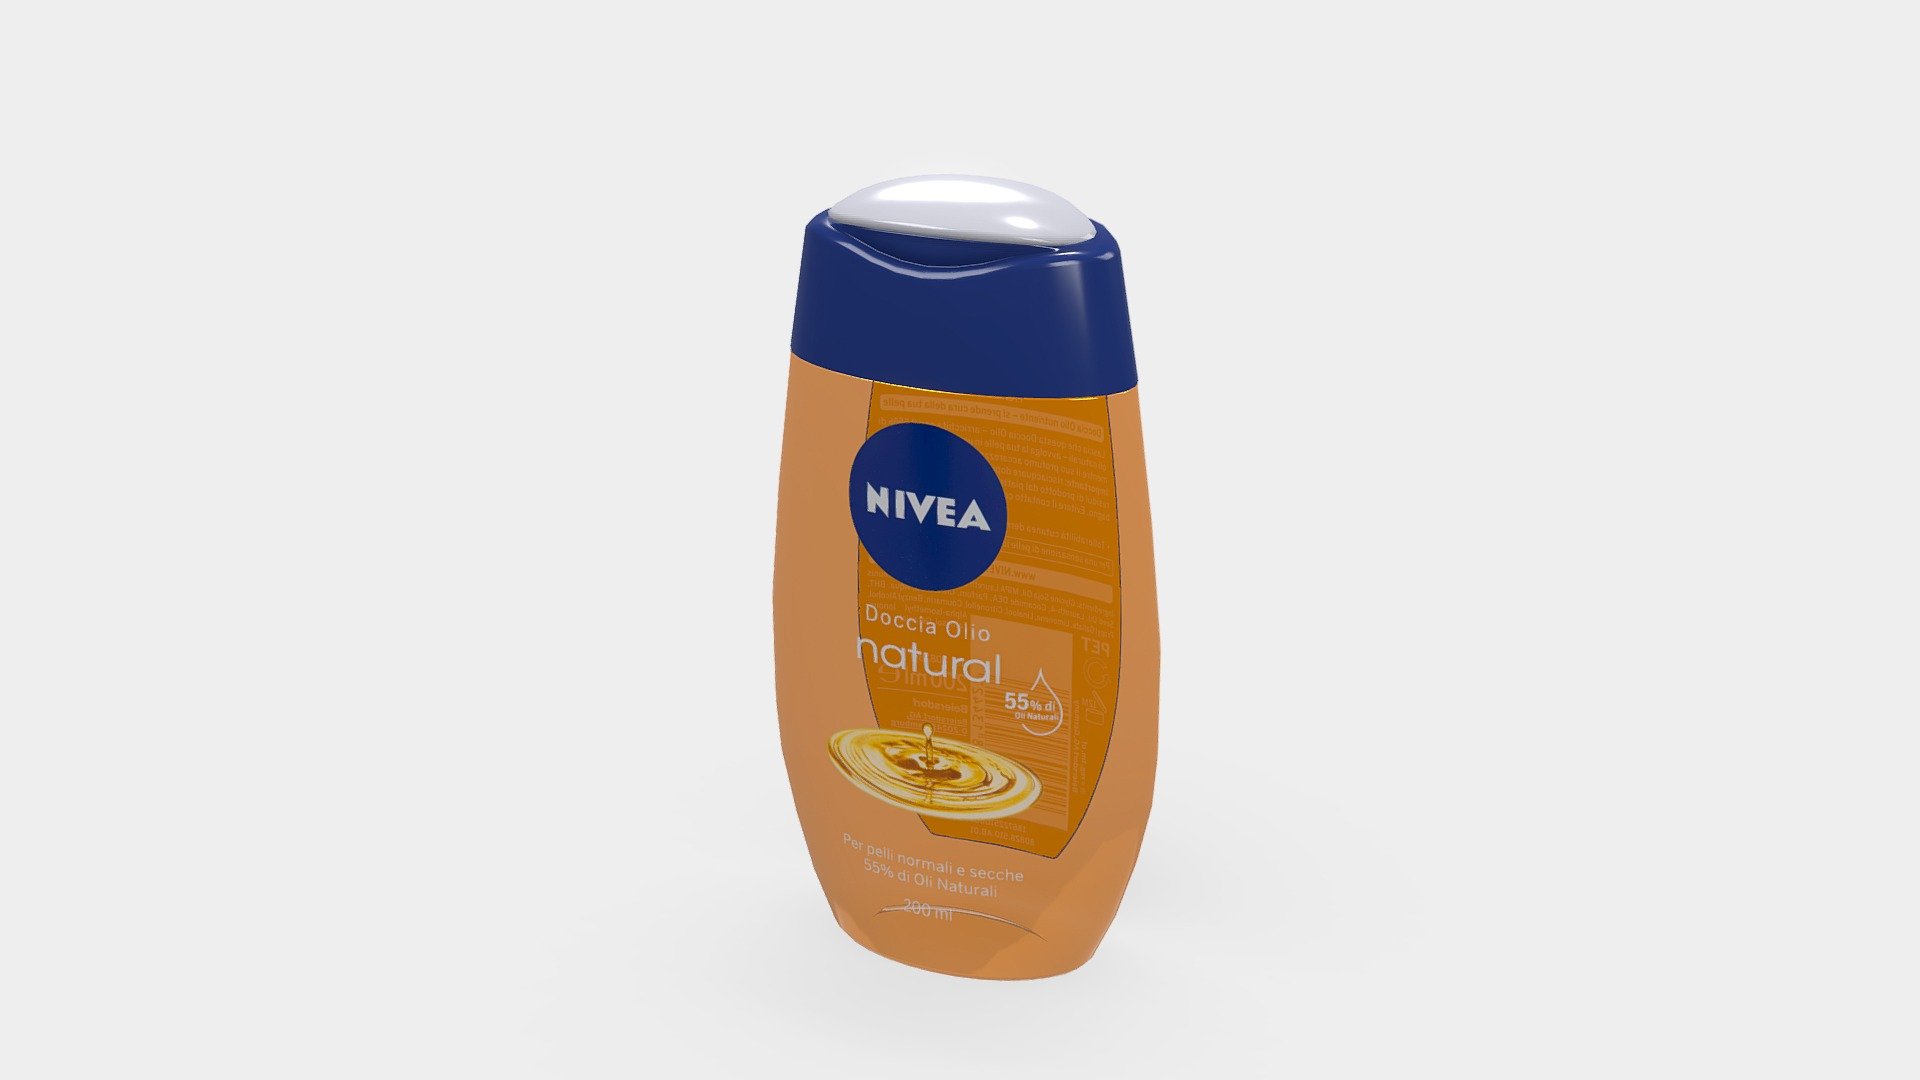 Nivea Natural Oil, Olio Doccia, 200ml
VR and game ready for high quality Architectural Visualization
EAN: 4005808134427 - NIVEA - Shower Natural Oil - 3D model by Invrsion 3d model